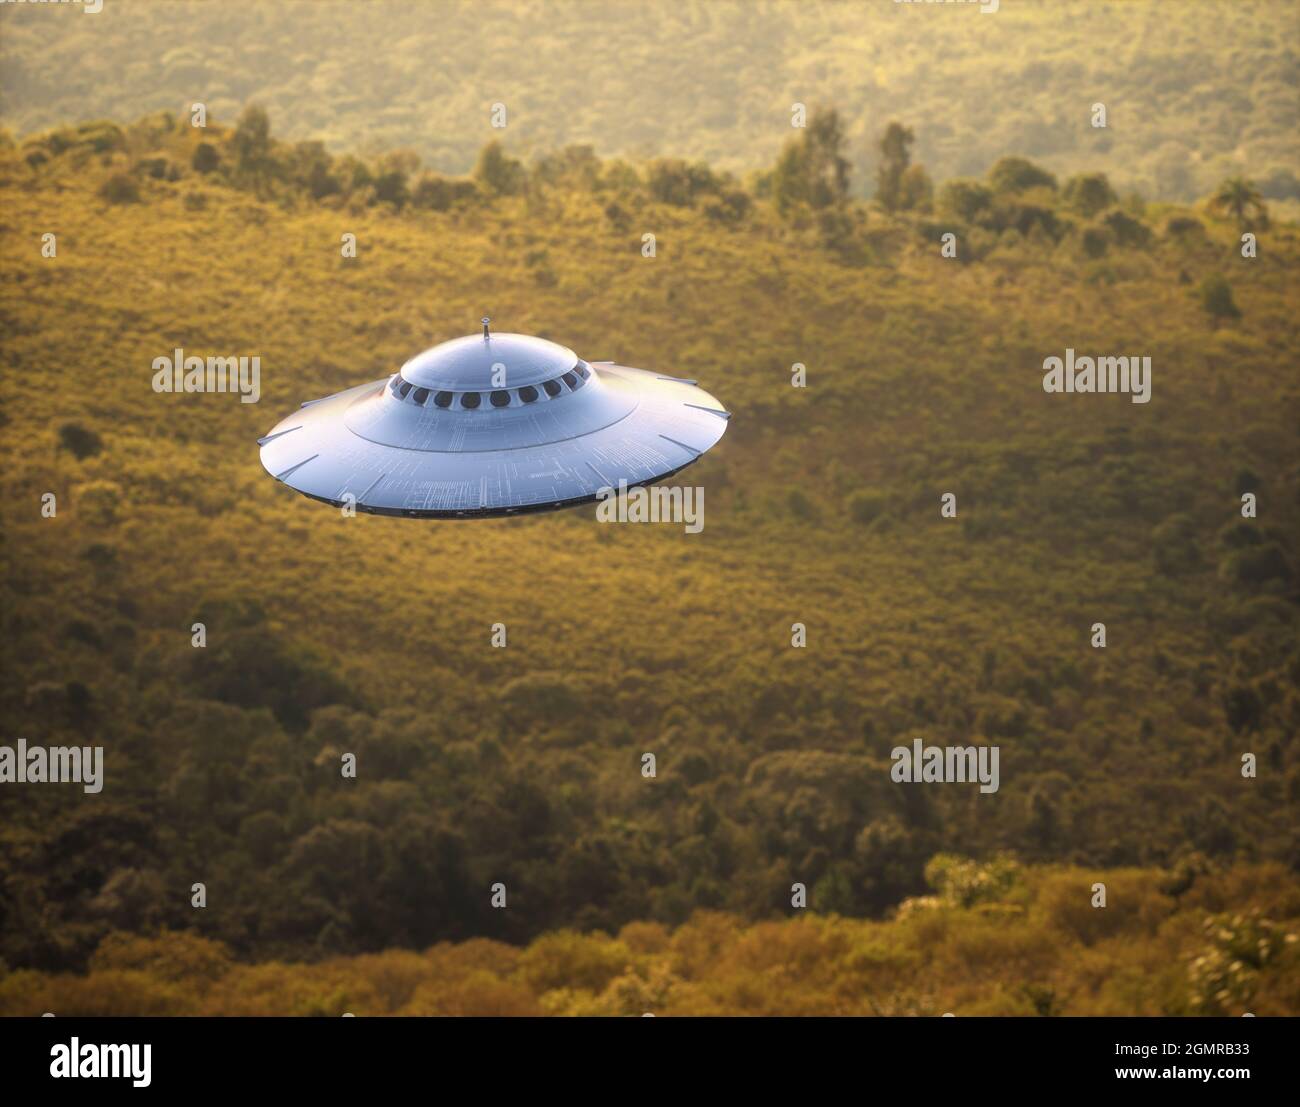 3D illustration of an UFO, unidentified flying object, gravitating over the forest and mountain ranges. Stock Photo